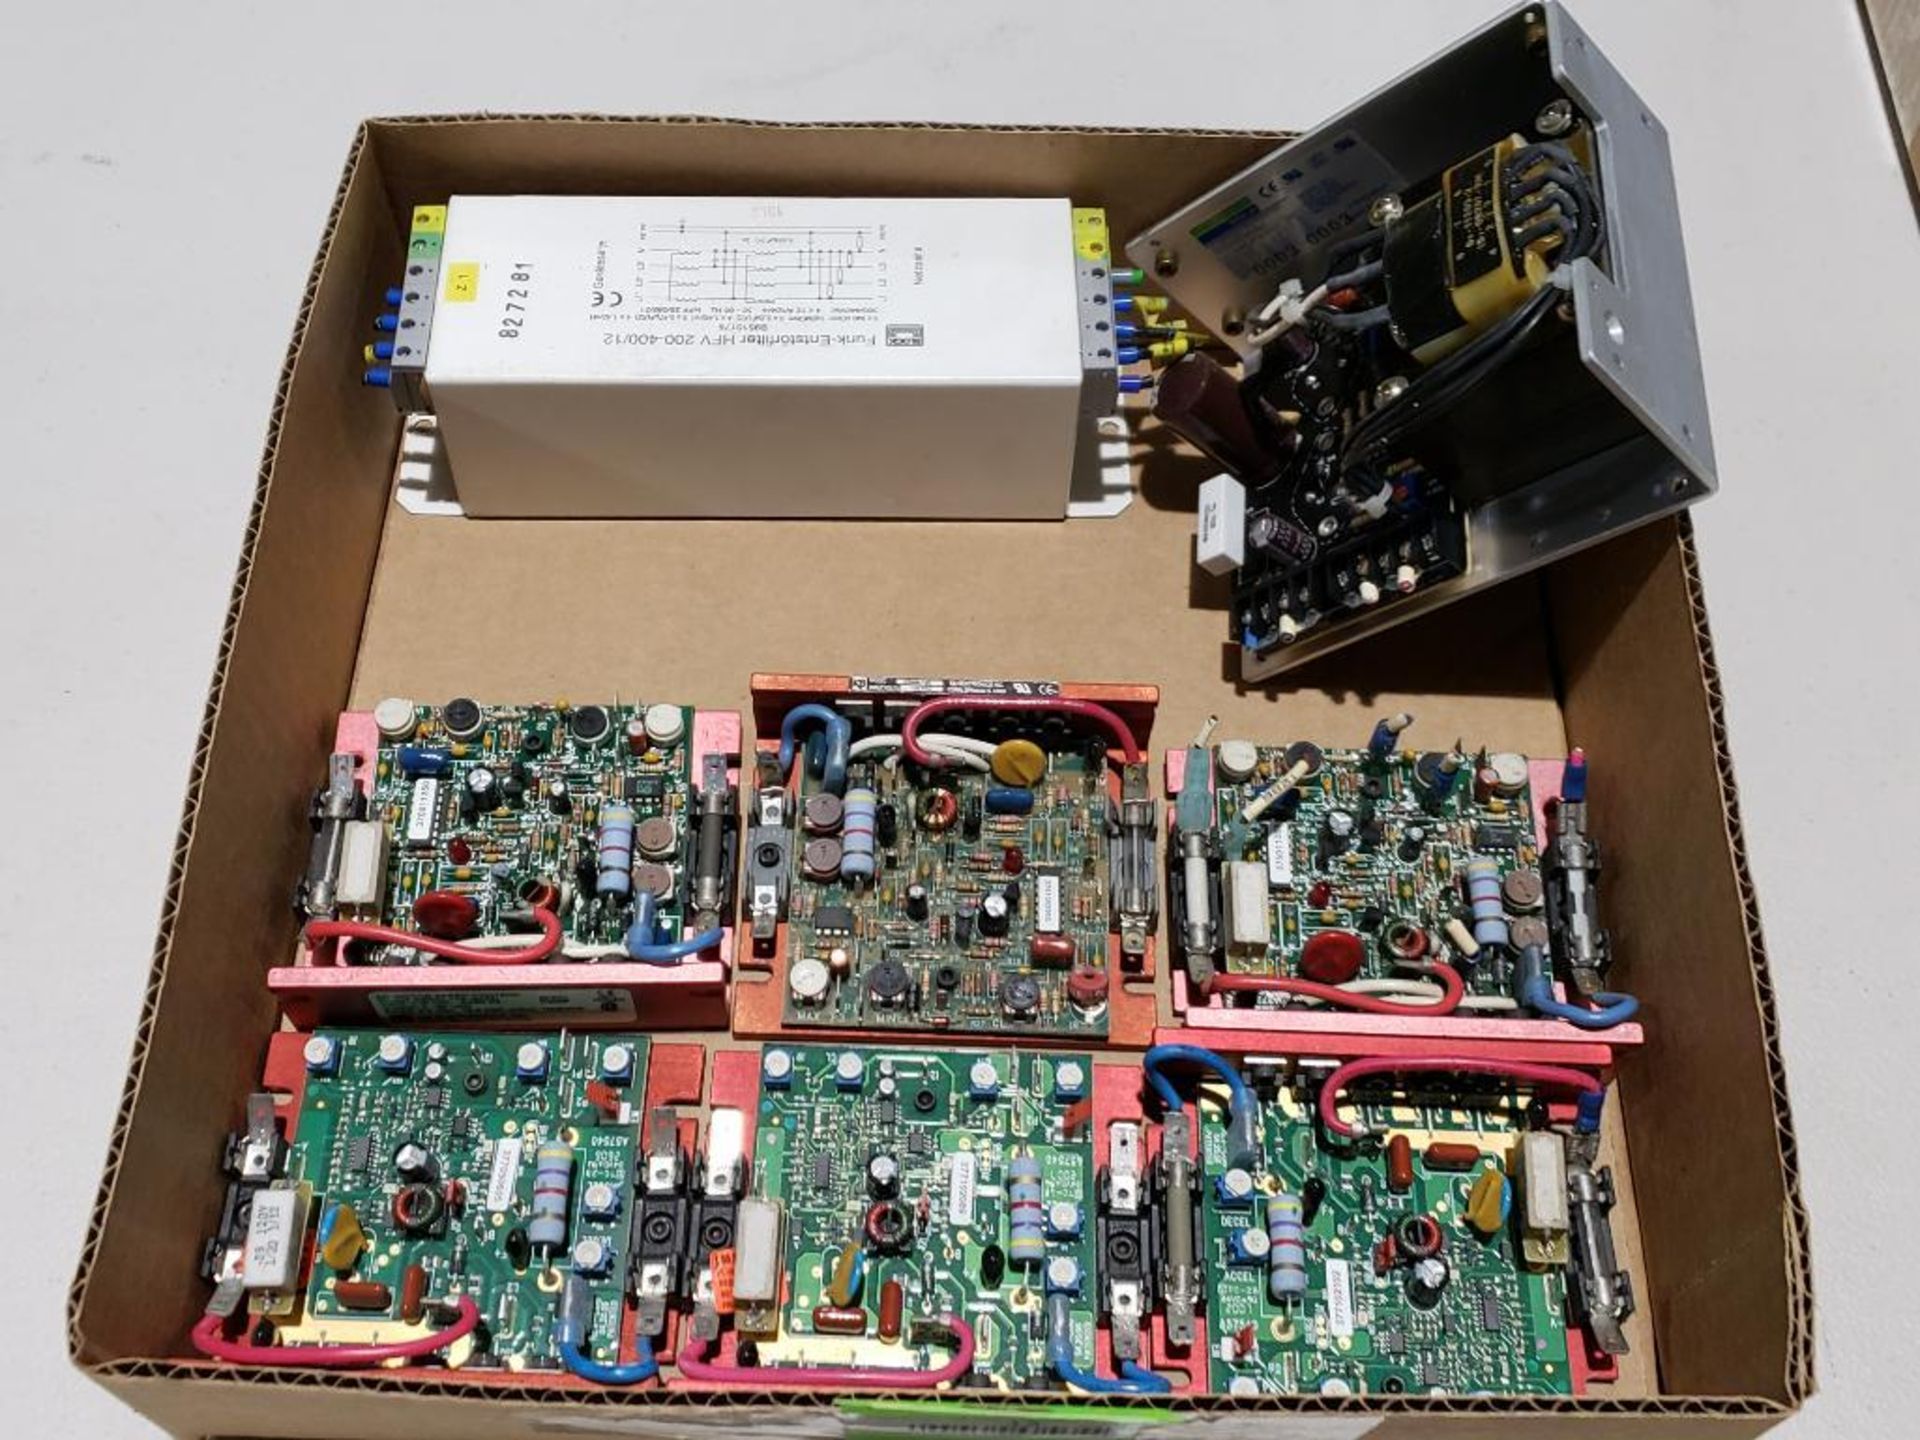 Qty 8 - drives and power supplies.